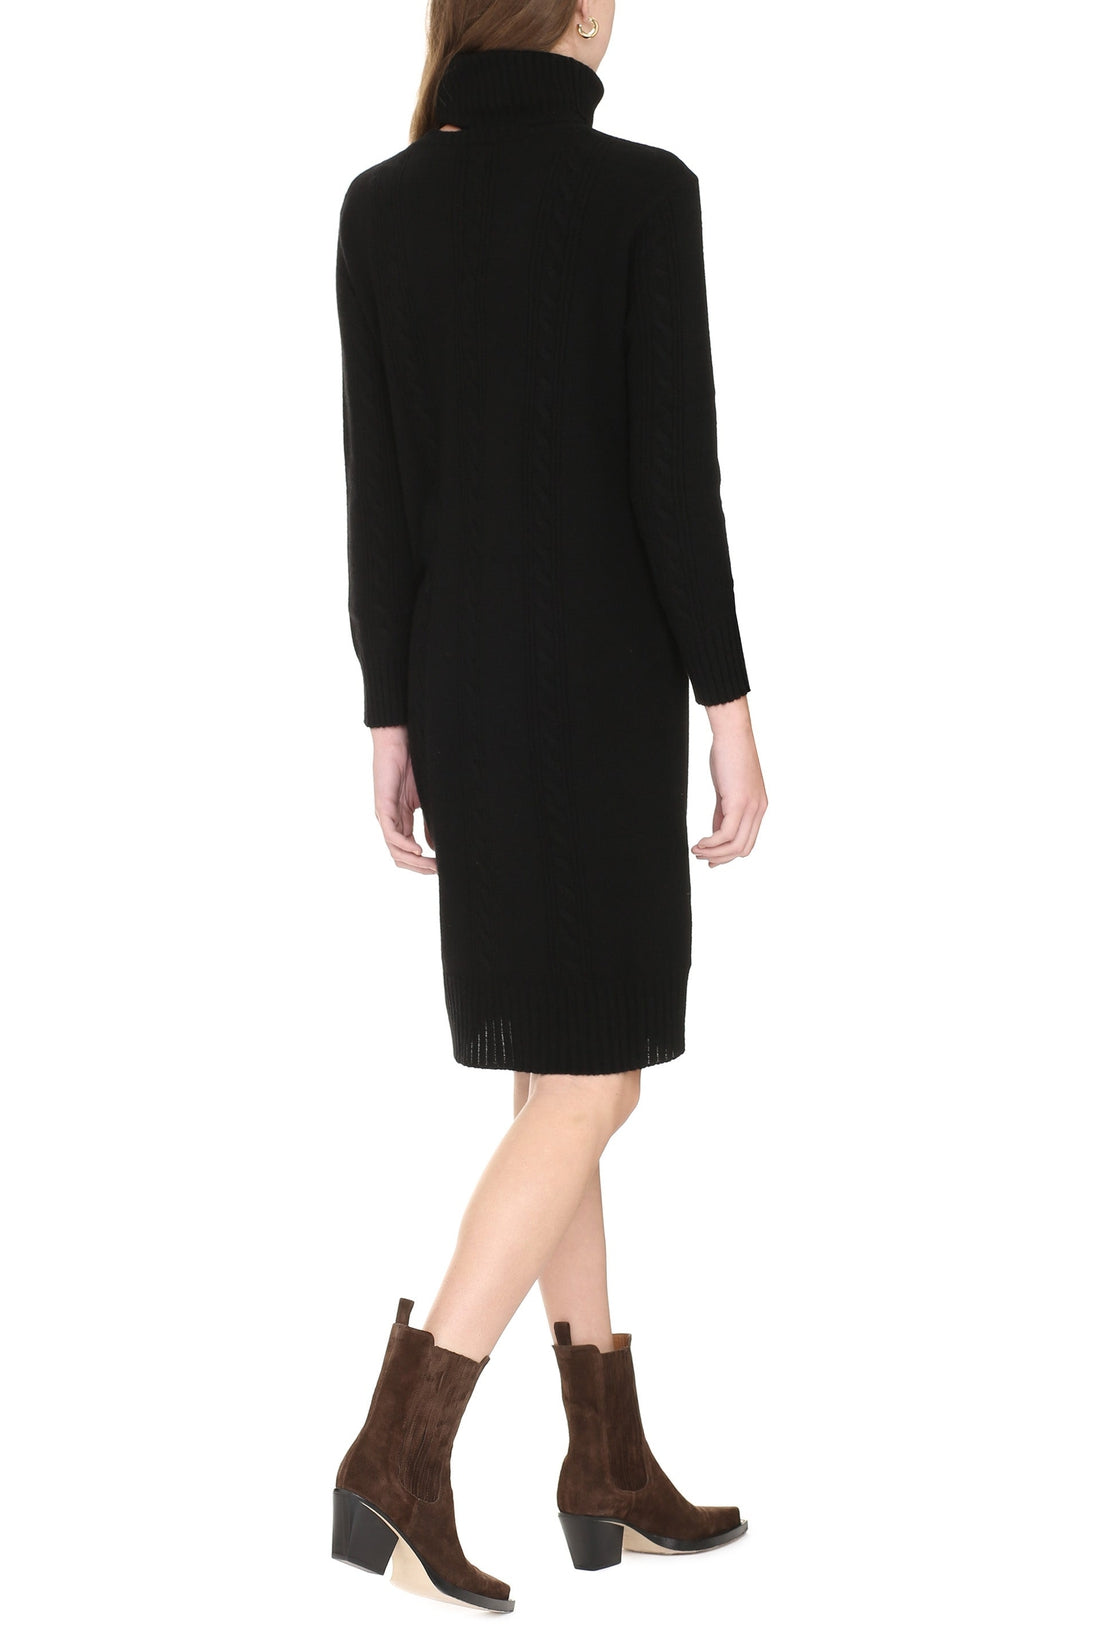 Max Mara Studio-OUTLET-SALE-Paese wool cable knit dress-ARCHIVIST